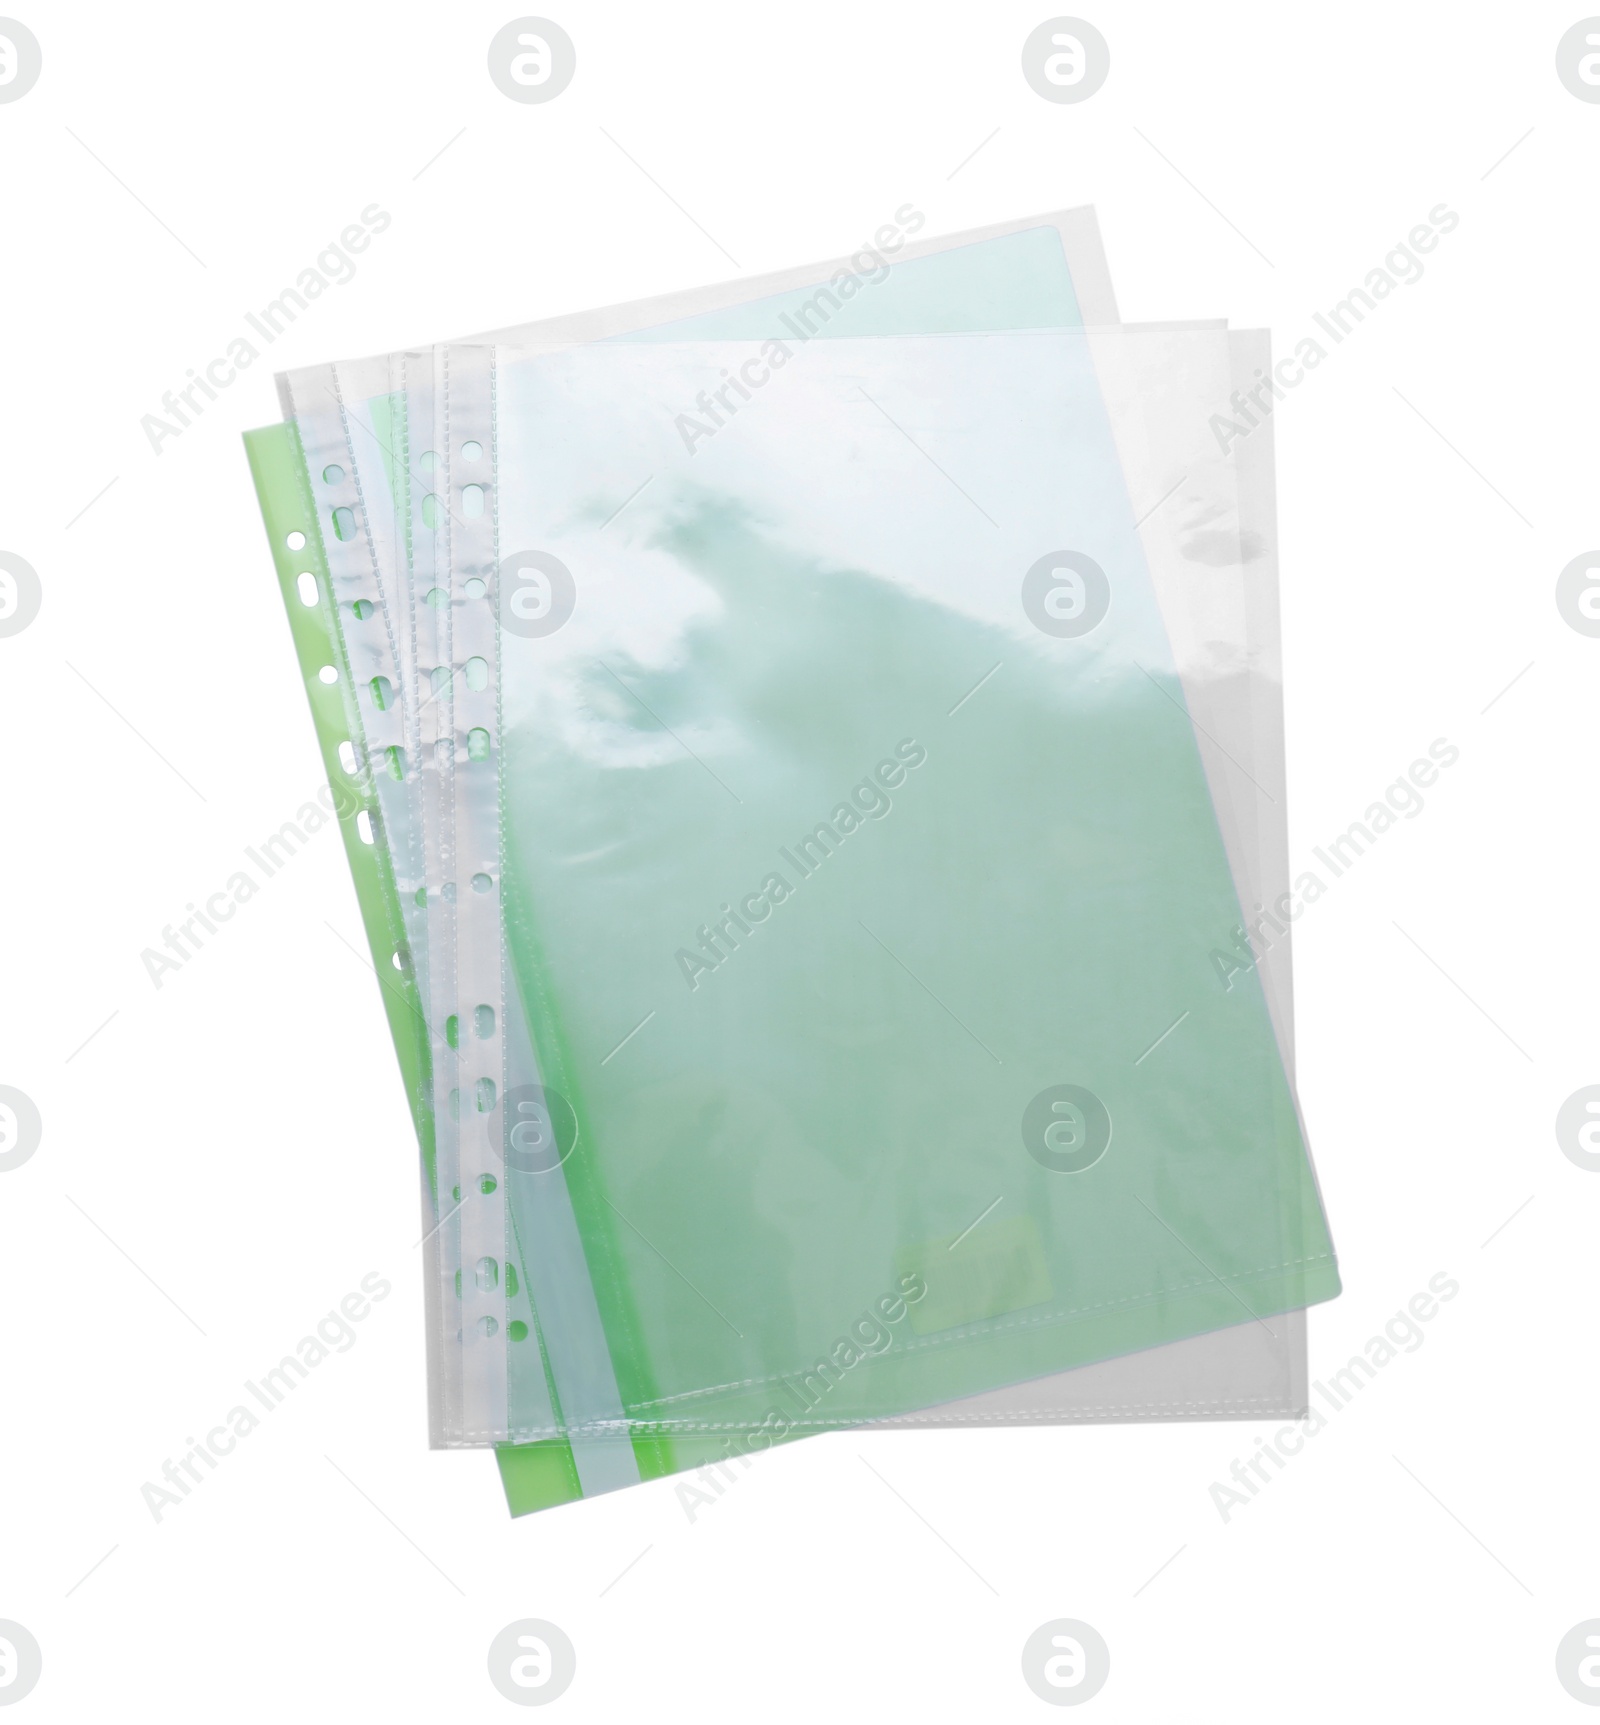 Photo of File folder with punched pockets isolated on white, top view